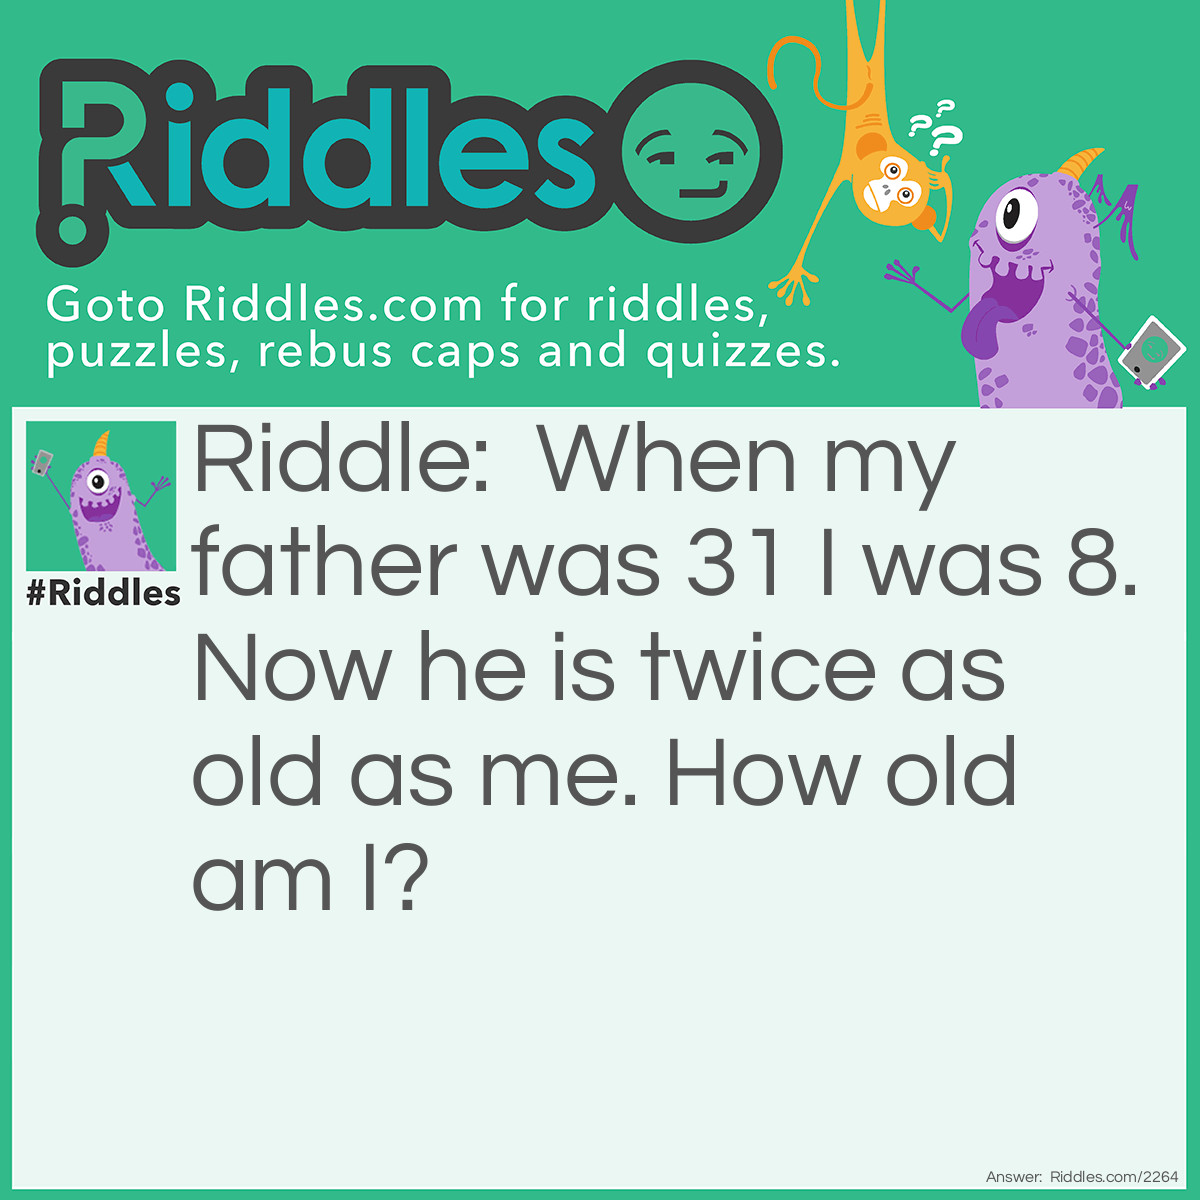 Riddle: When my father was 31 I was 8. Now he is twice as old as me. How old am I? Answer: The difference in age is 23 years, so I must be 23 if my father is twice as old as me.